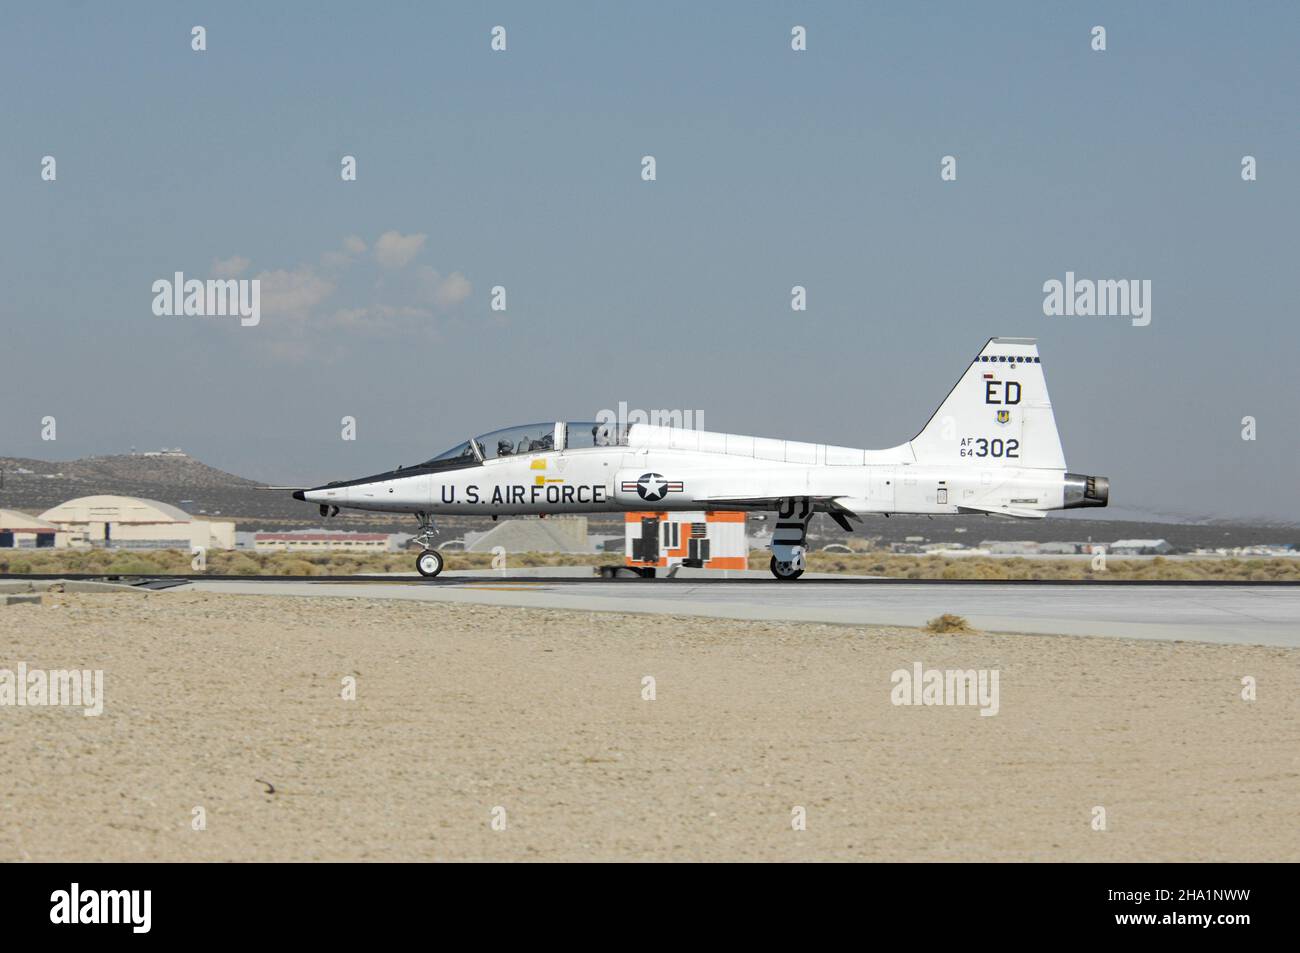 United States Air Force T-38 taxis after landing at Edwards Air Force Base in California. Stock Photo